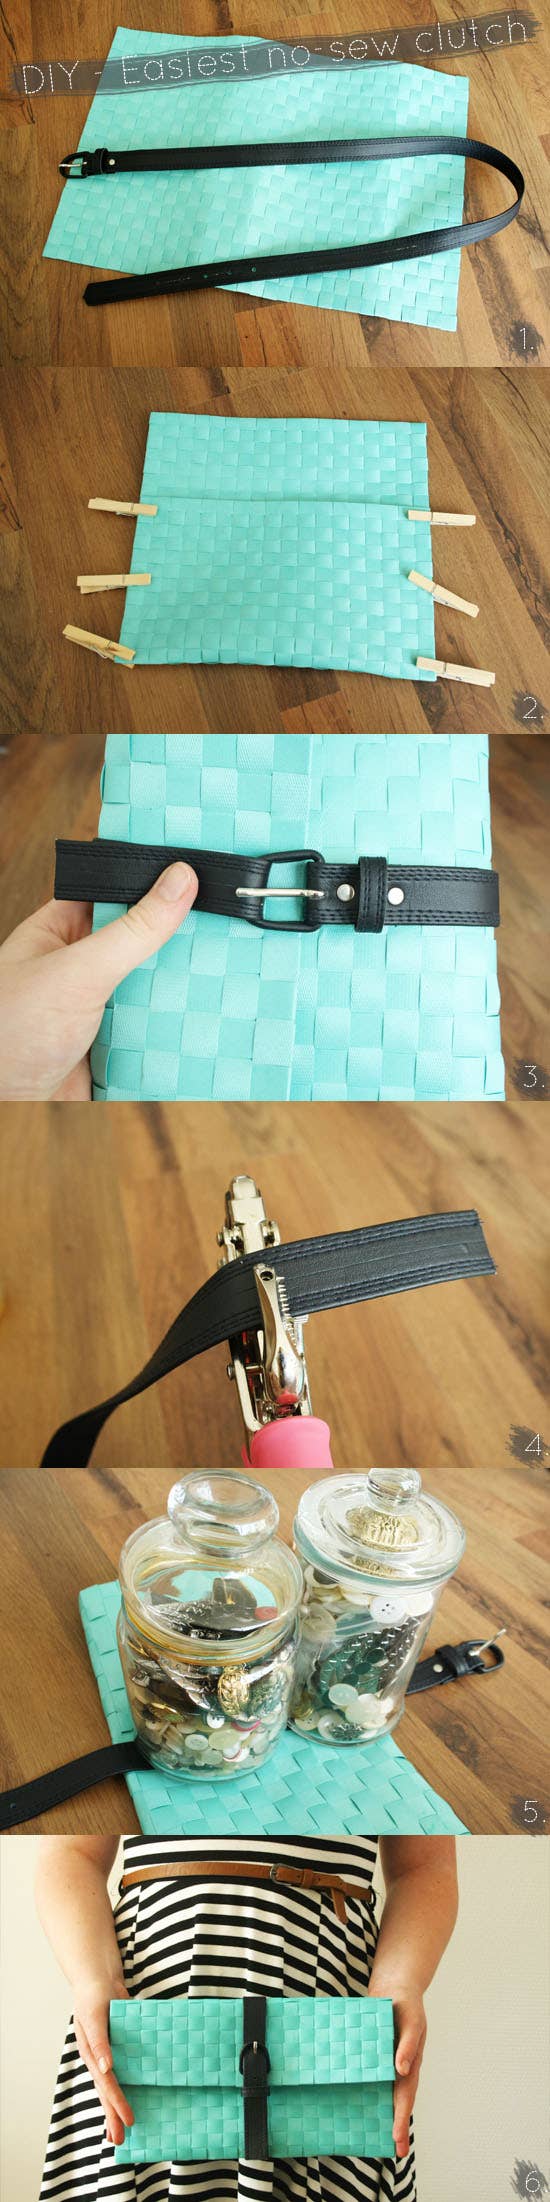 Easy No-Sew Projects